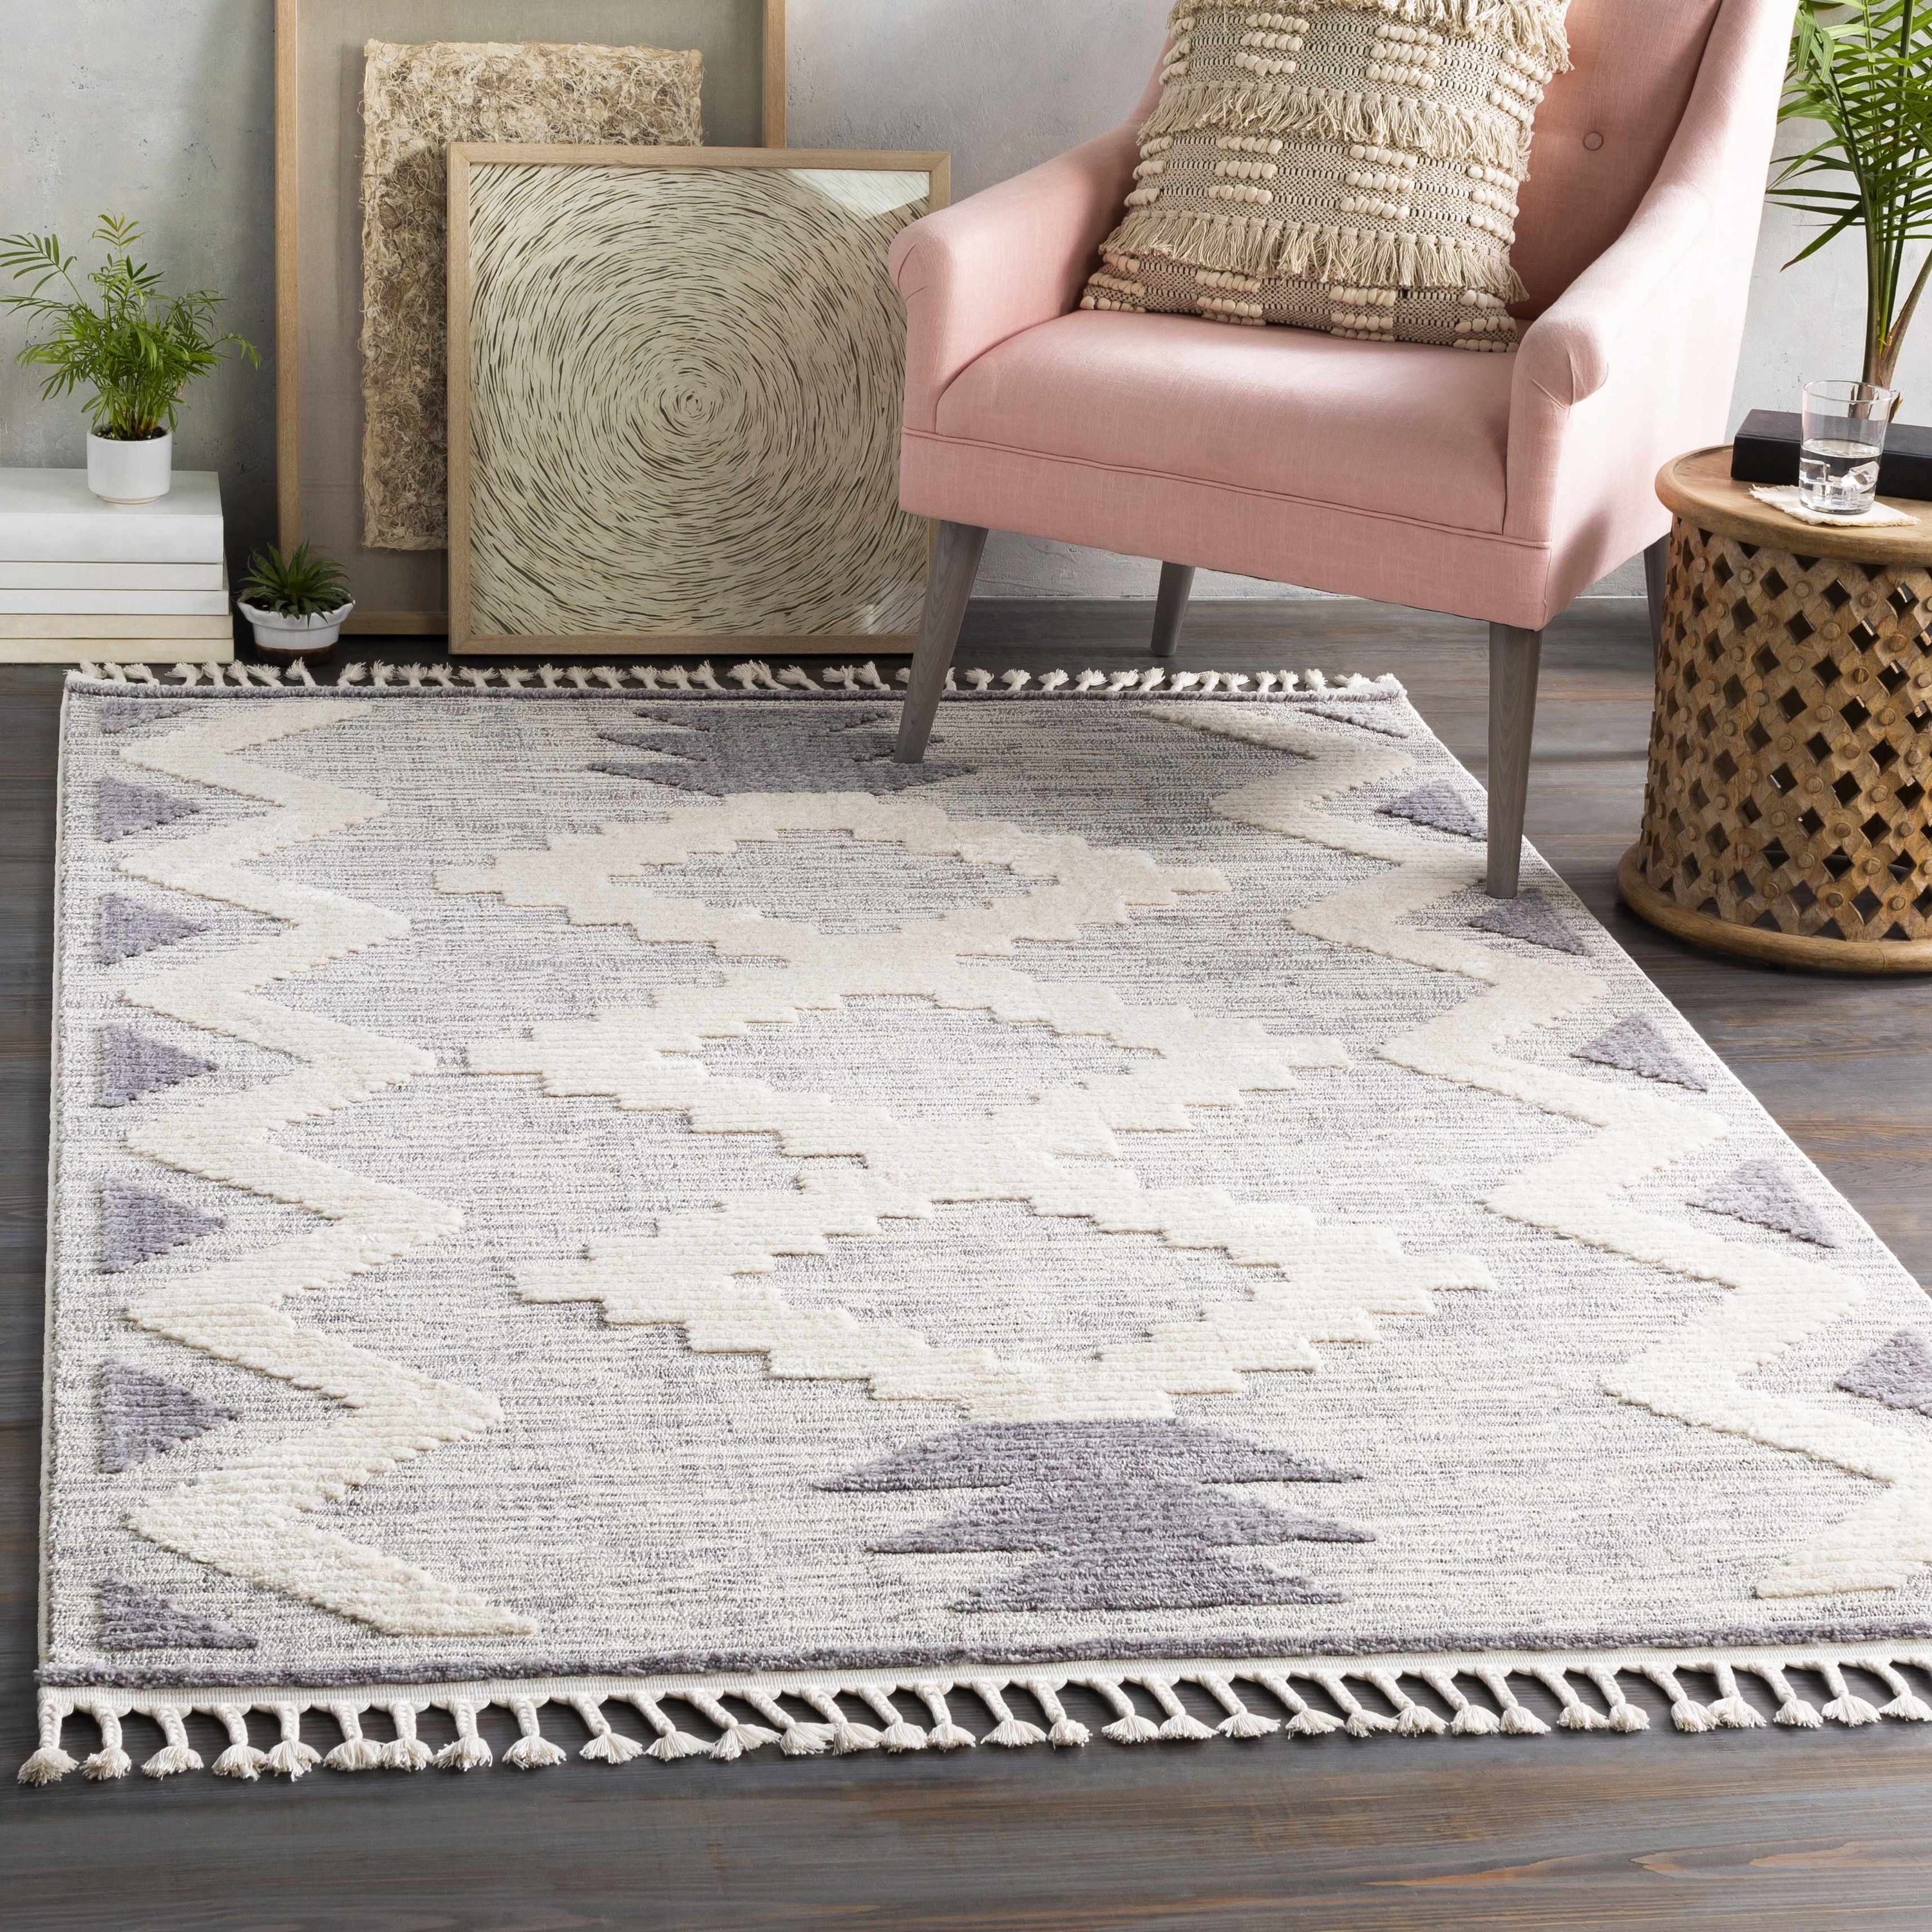 textured rug with tassels and a geometric design styled in living room